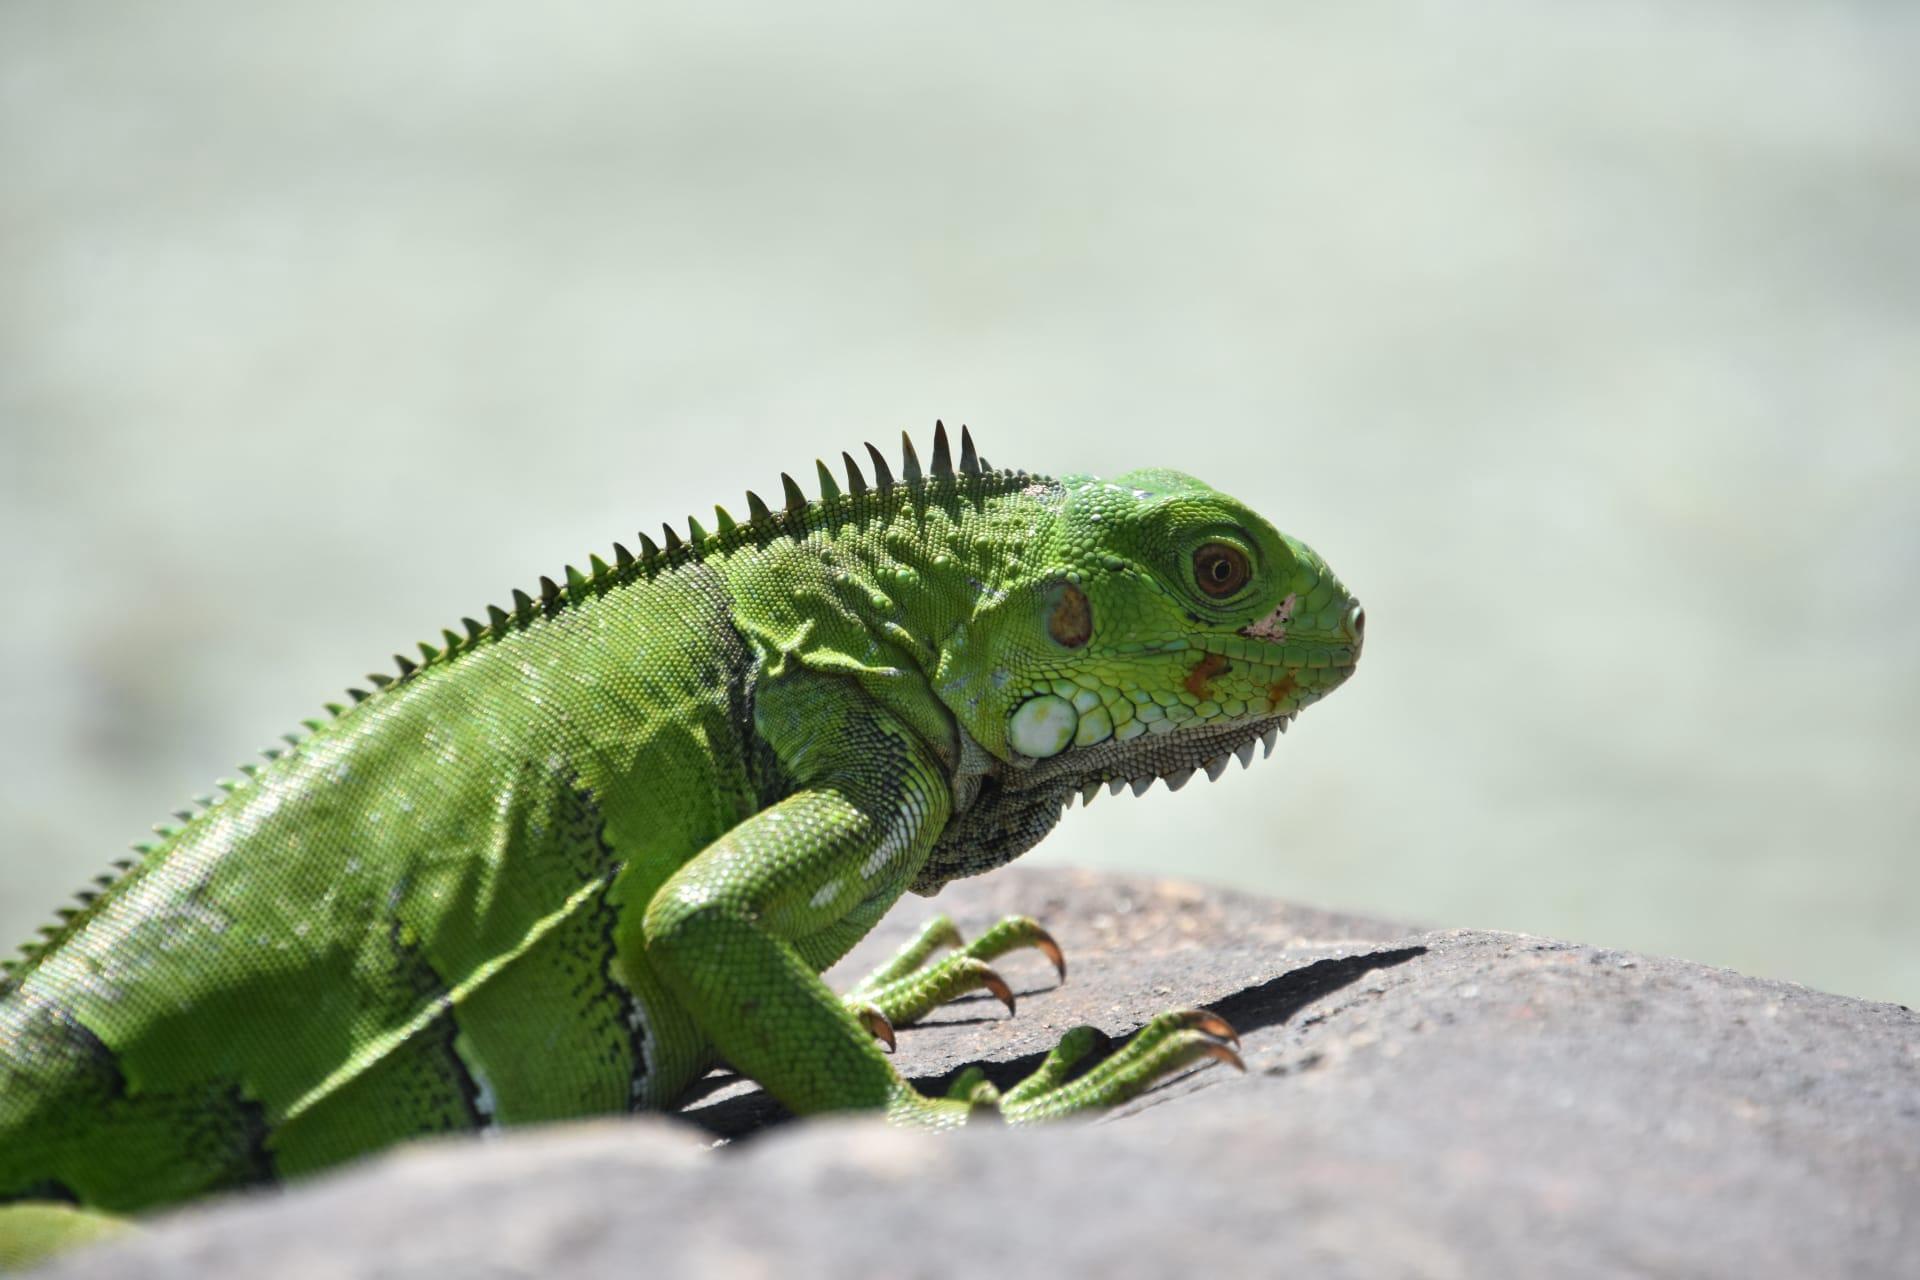 Dragon lizard pictures